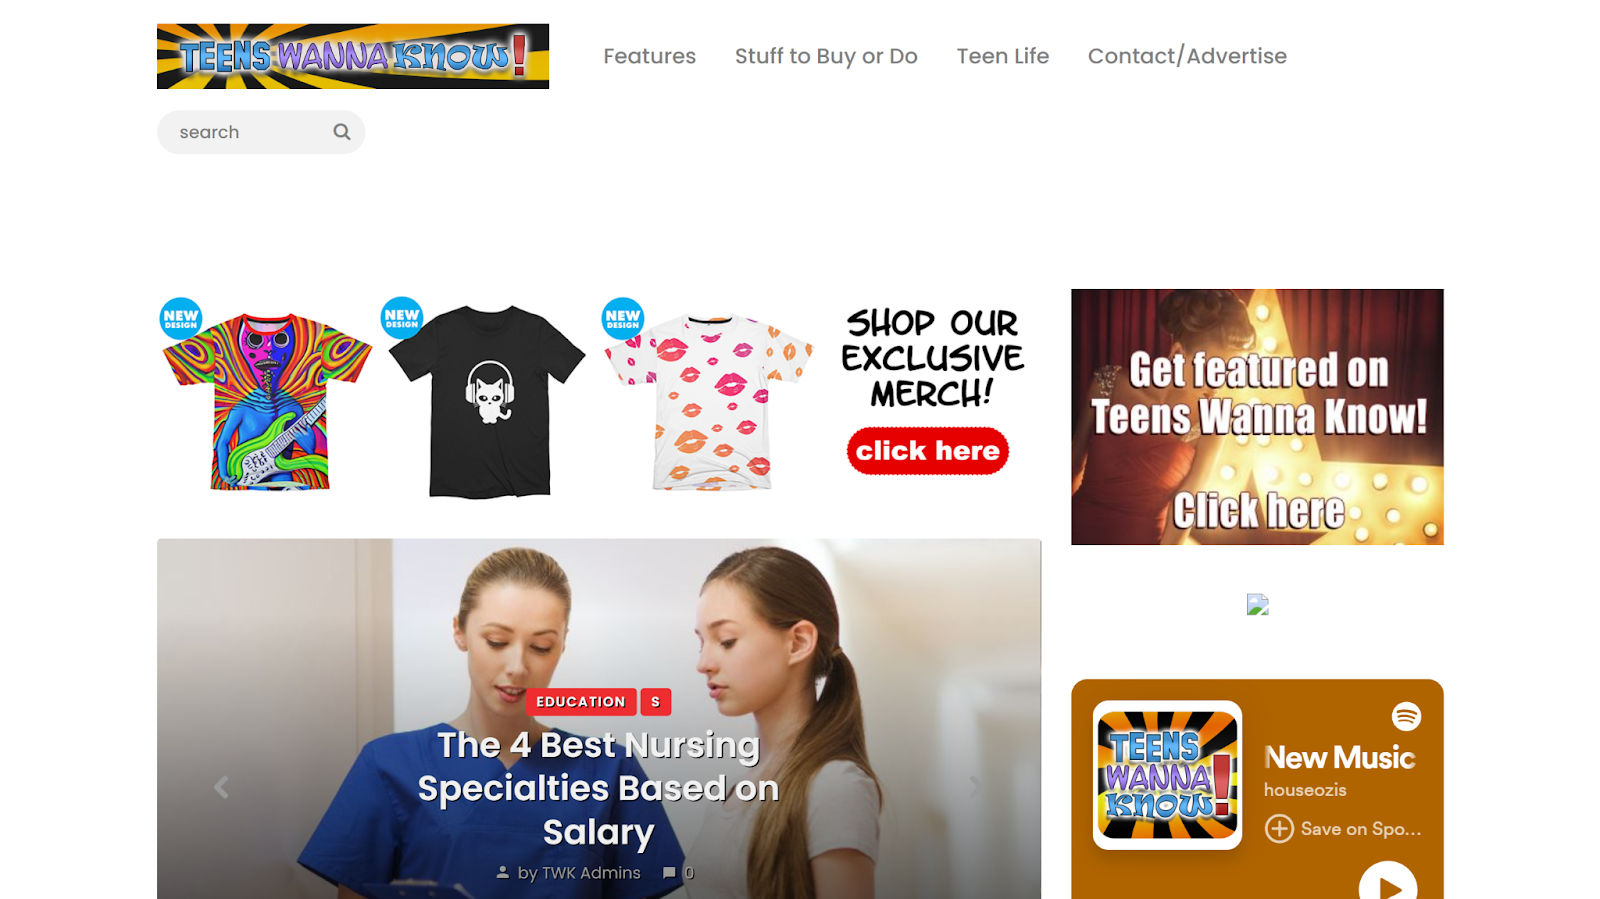 Teens Wanna Know offers content on lifestyle, education, career and much more for teenagers.